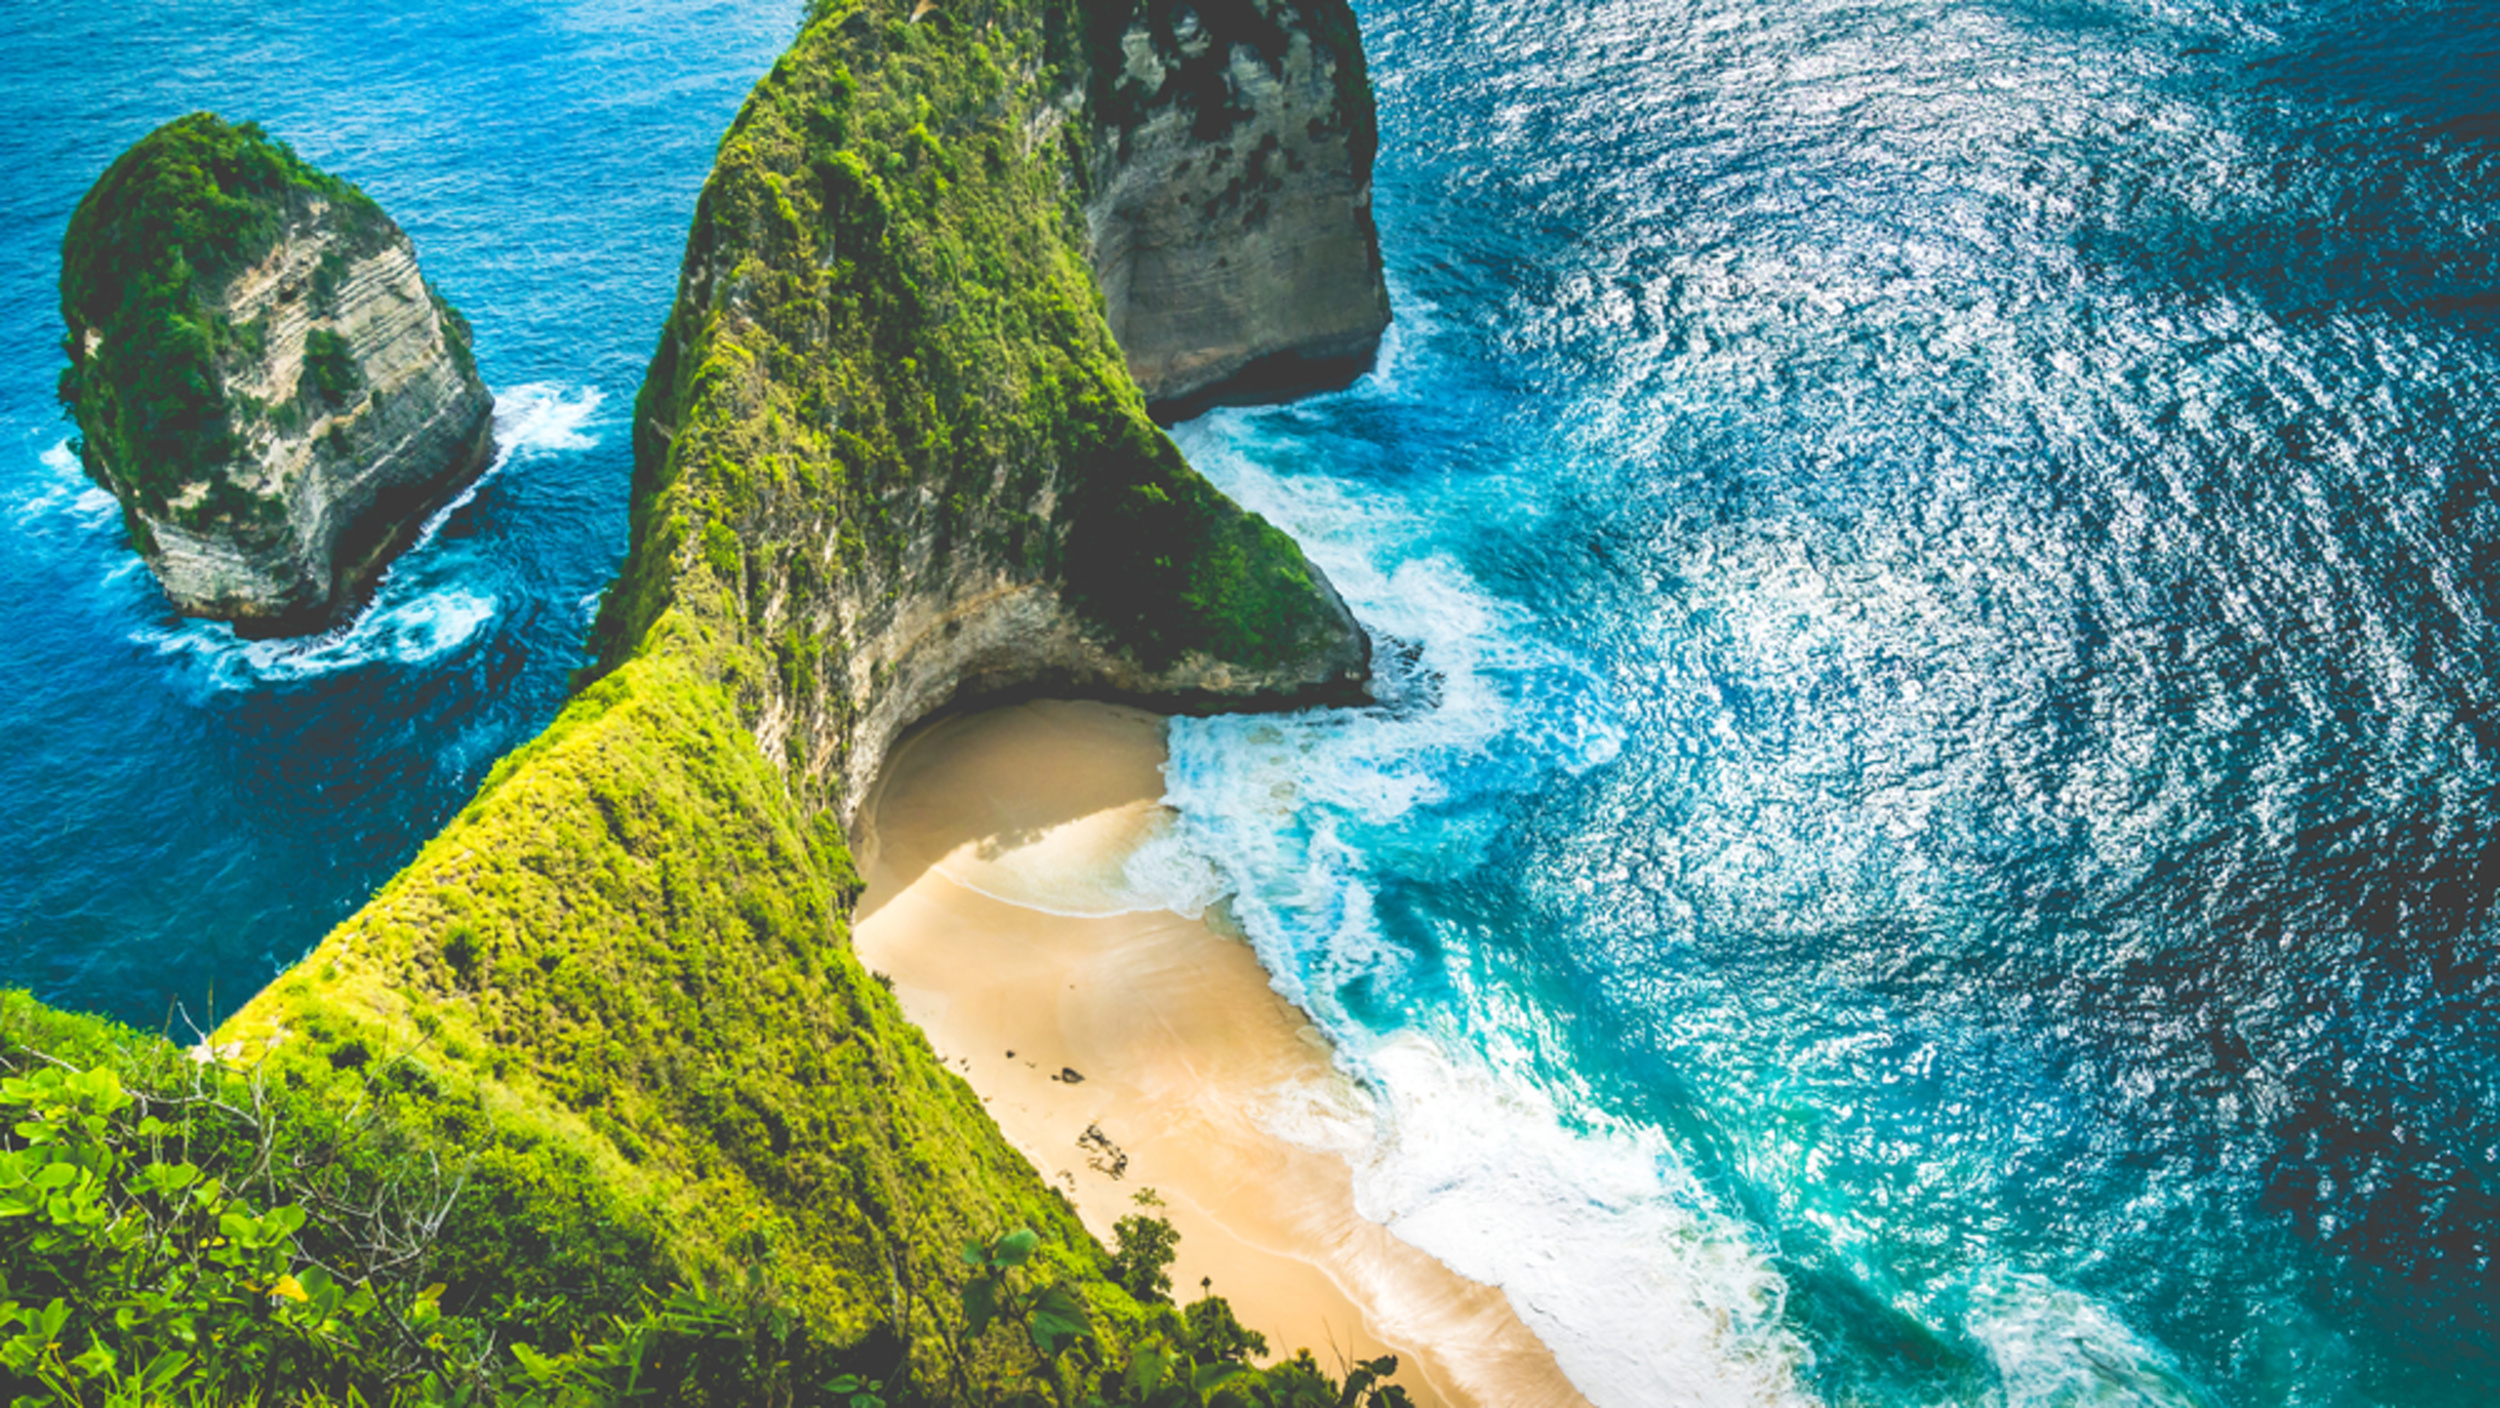 <p>This beautiful Indonesian island is the definition of a tropical paradise. Turquoise blue, calm ocean waters await, along with stunning beaches, gorgeous rainforest greenery, and a slew of interesting cultural sites. </p><p><a href='https://www.msn.com/en-us/community/channel/vid-cj9pqbr0vn9in2b6ddcd8sfgpfq6x6utp44fssrv6mc2gtybw0us'>Follow us on MSN to see more of our exclusive lifestyle content.</a></p>